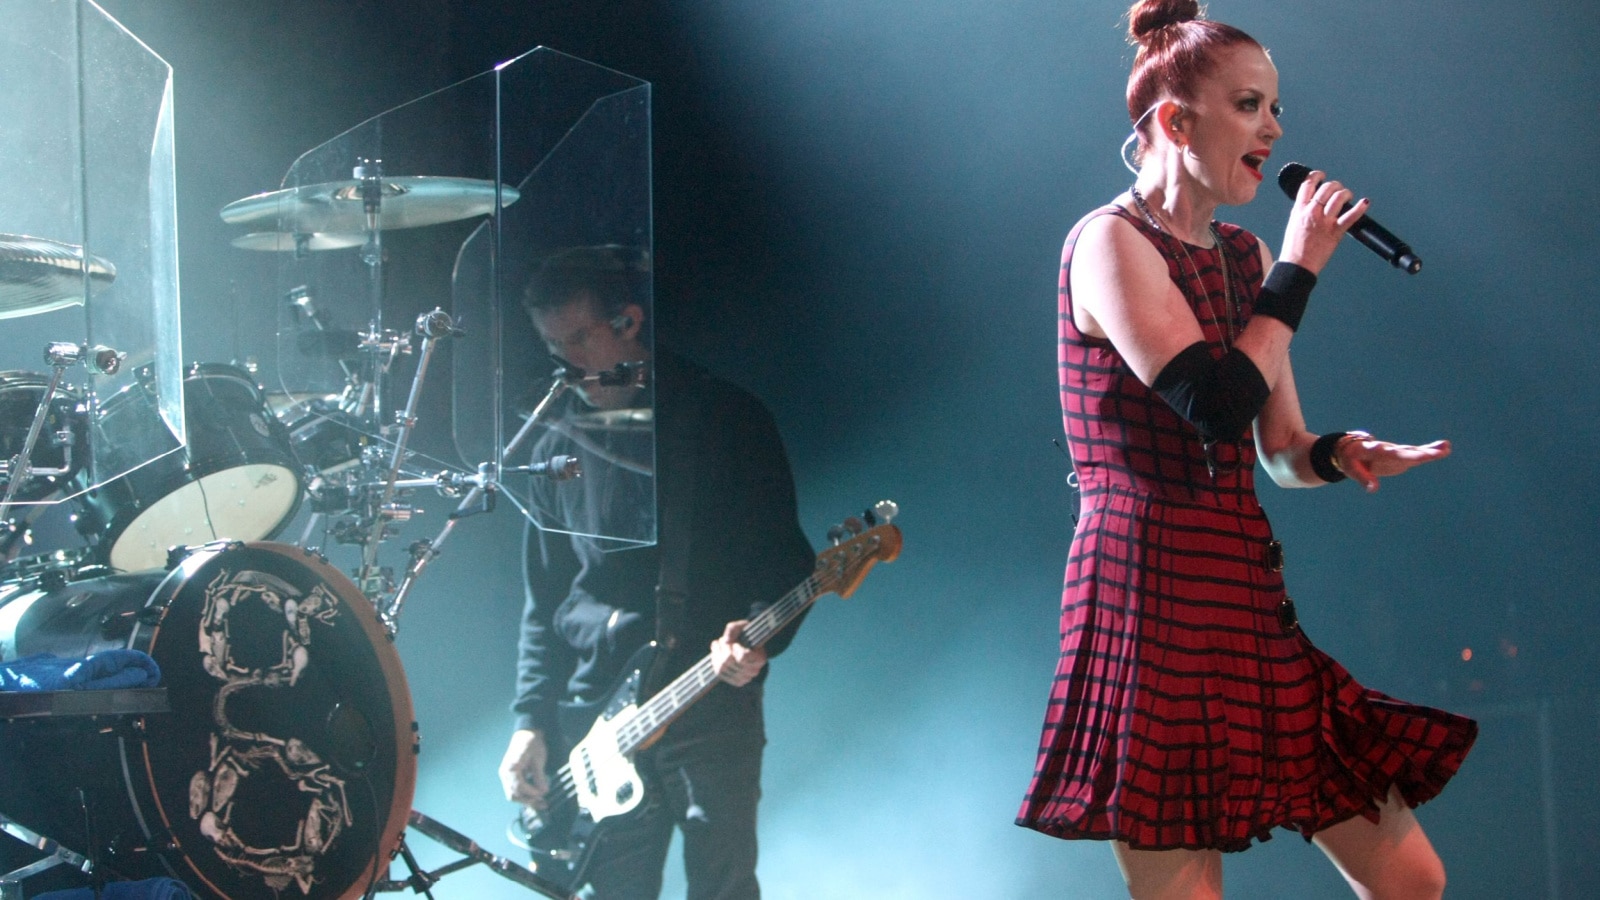 KYIV - NOVEMBER 12: Shirley Manson from GARBAGE performs as part of the 2012 tour, on stage at Sport`s Palace on November 12, 2012 in Kyiv, Ukraine.